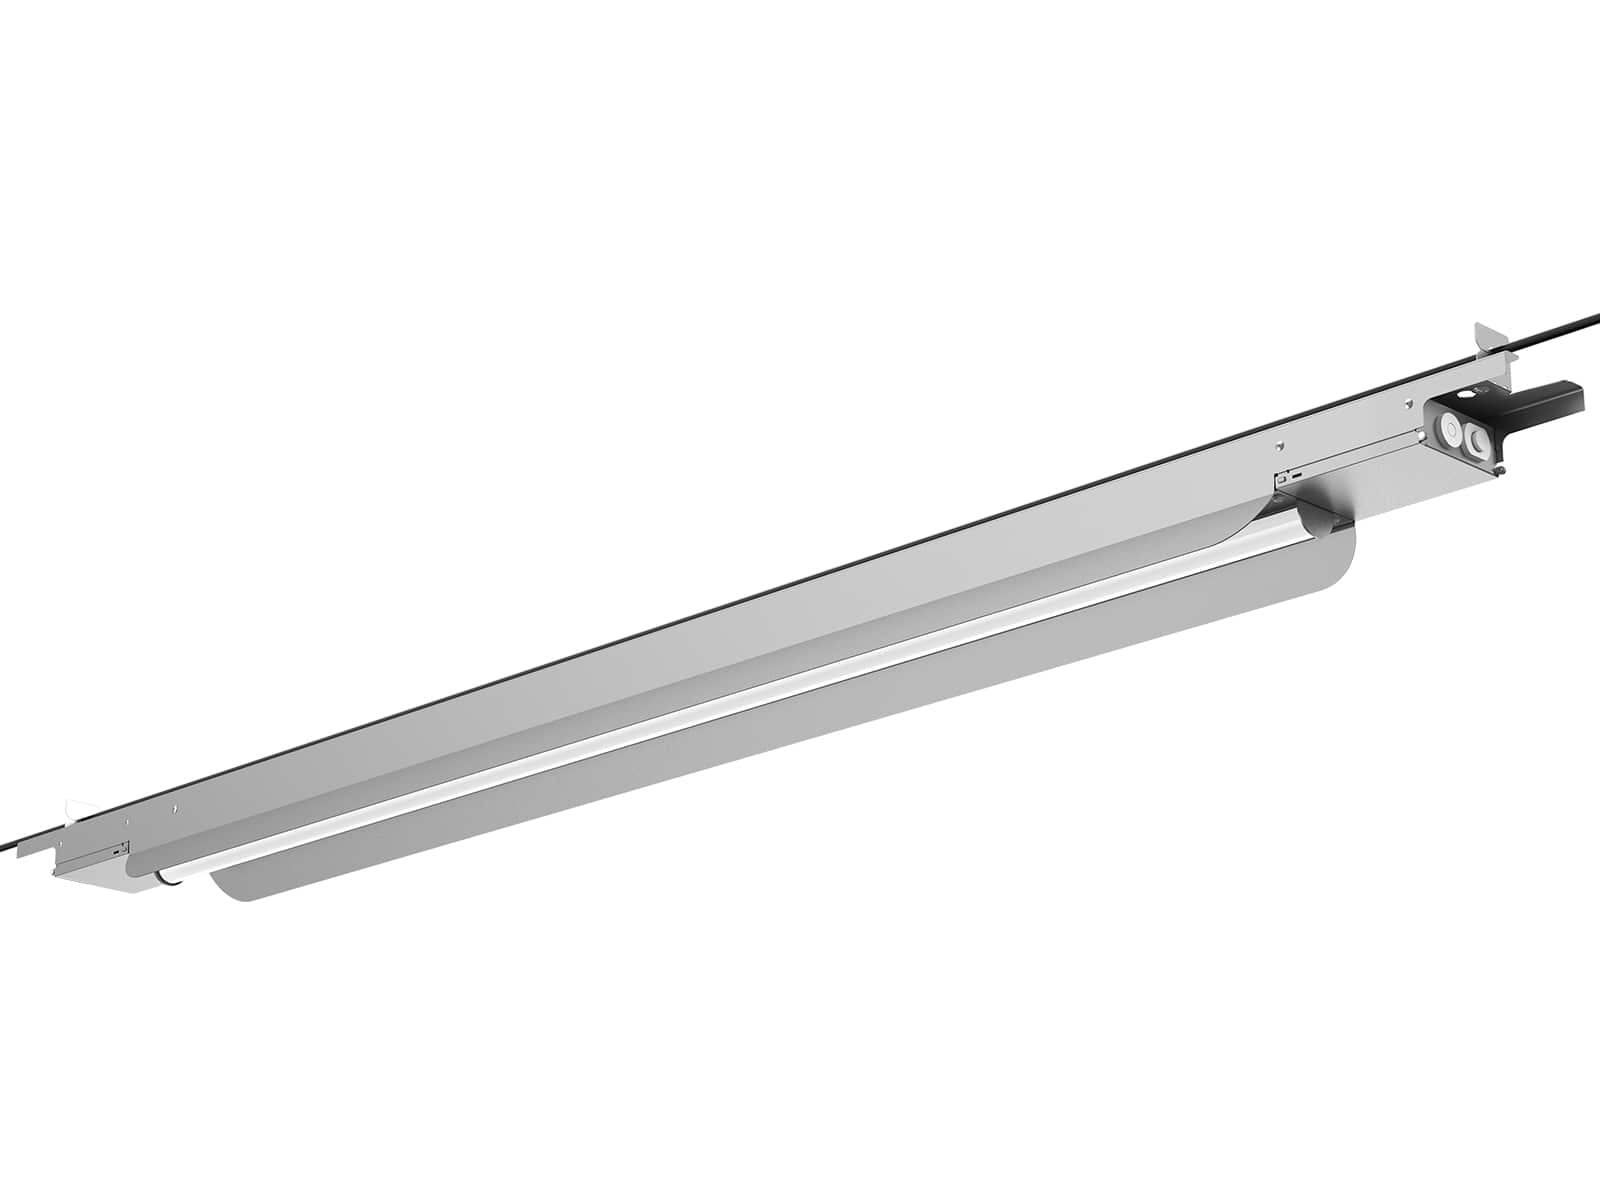 LHB41 LED Linear Light Replace Traditional T8 Lamp